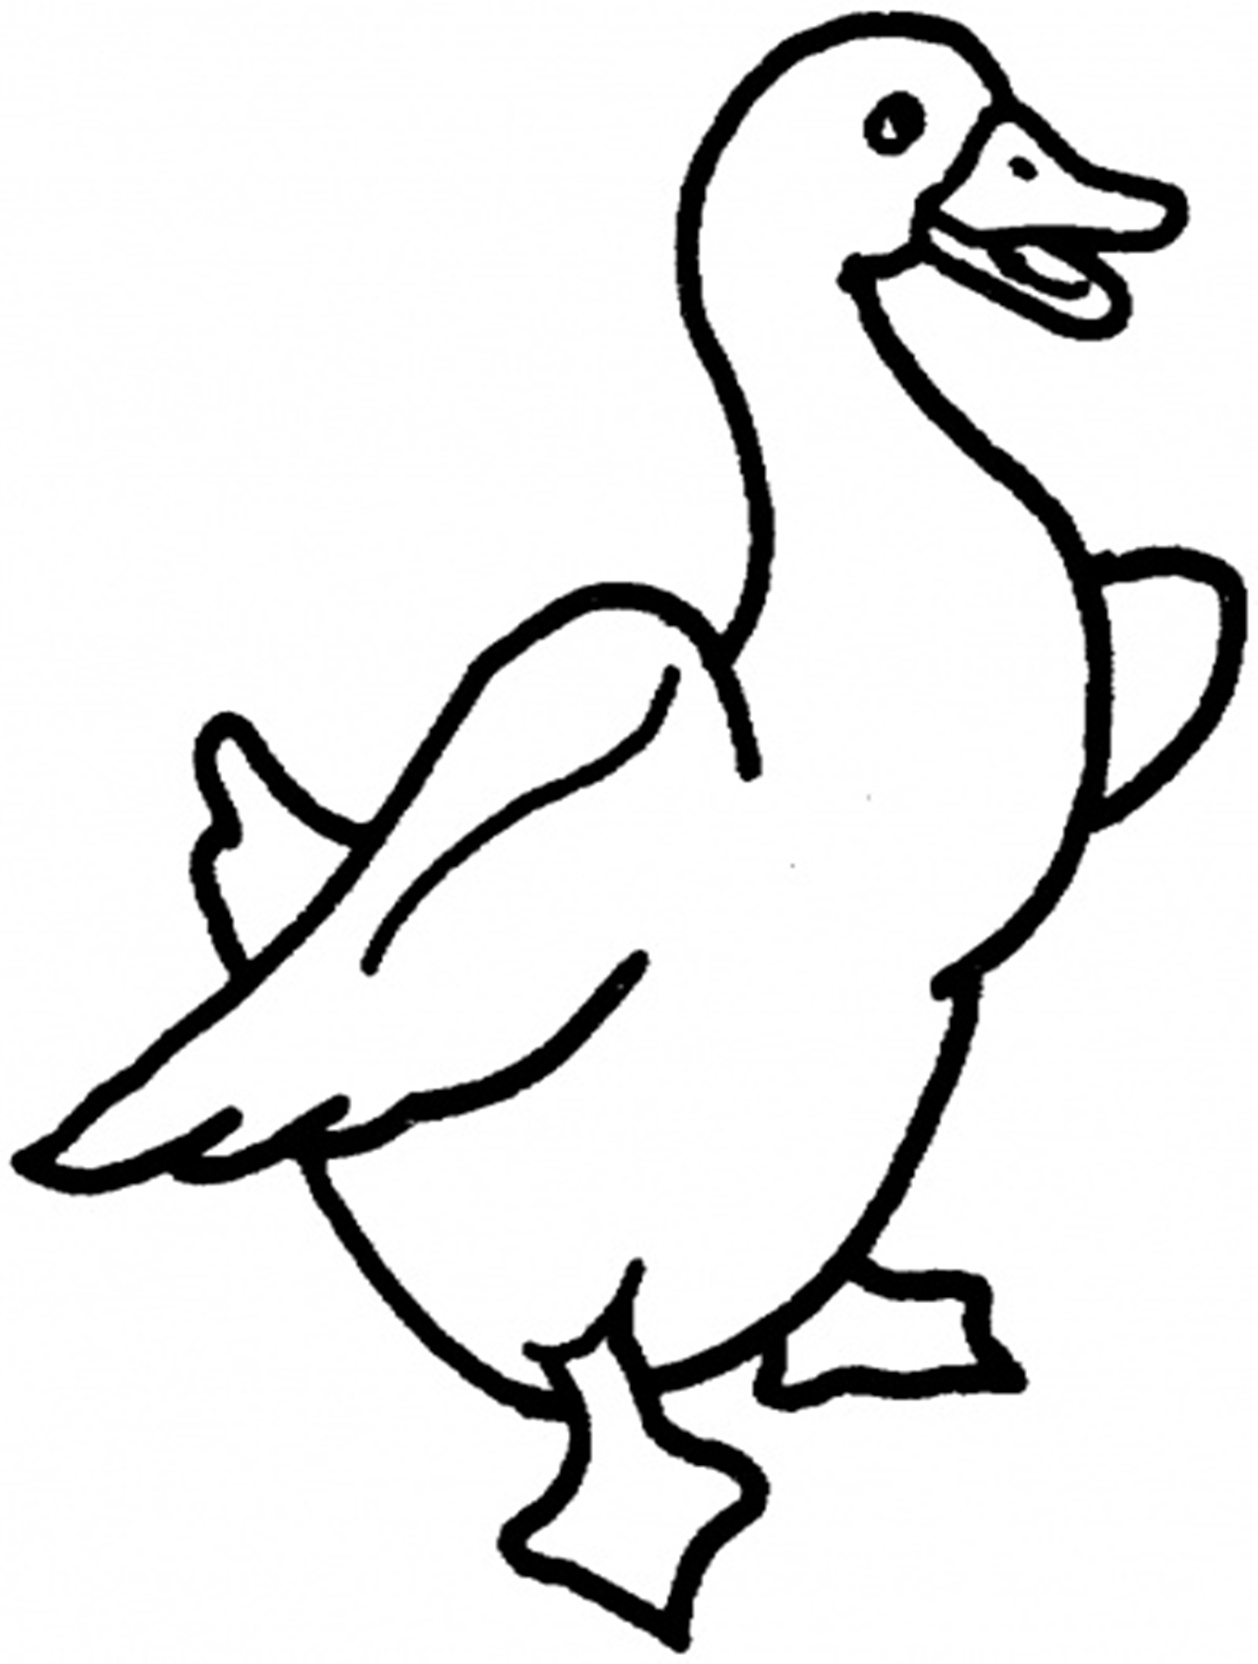 goose clipart black and white - photo #36